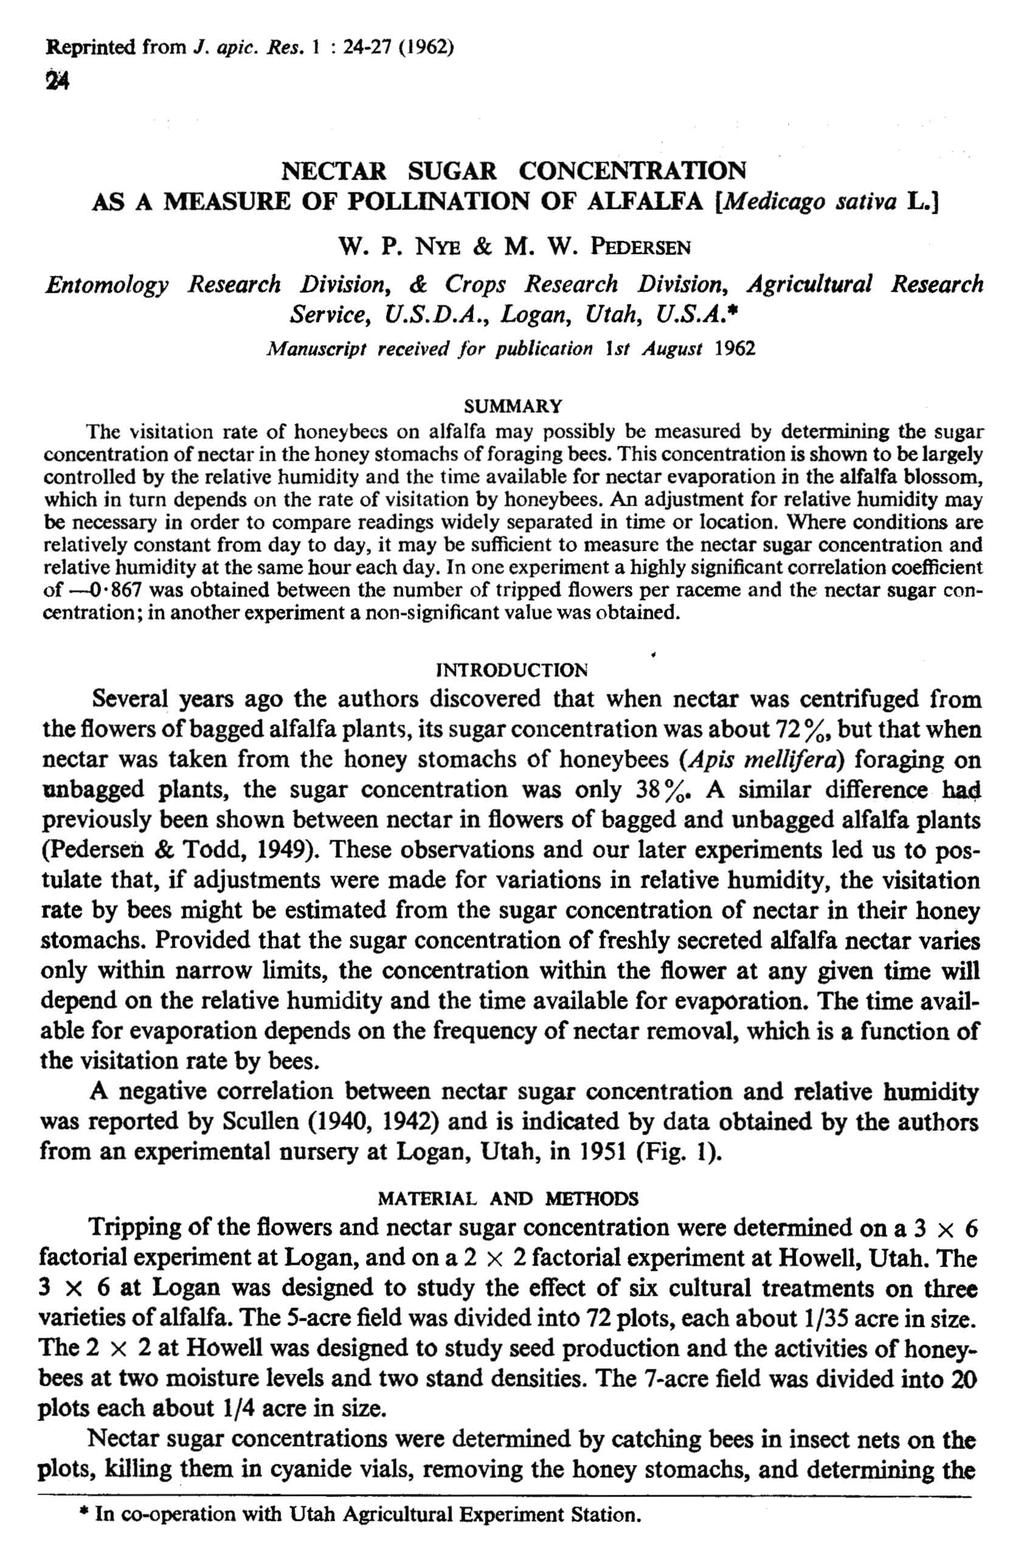 Reprinted from J. apic. Res. 1 : 24-27 (J 962) NECTAR SUGAR CONCENTRATION AS A MEASURE OF POLLINATION OF ALFALFA [Medica go sativa L.] W.